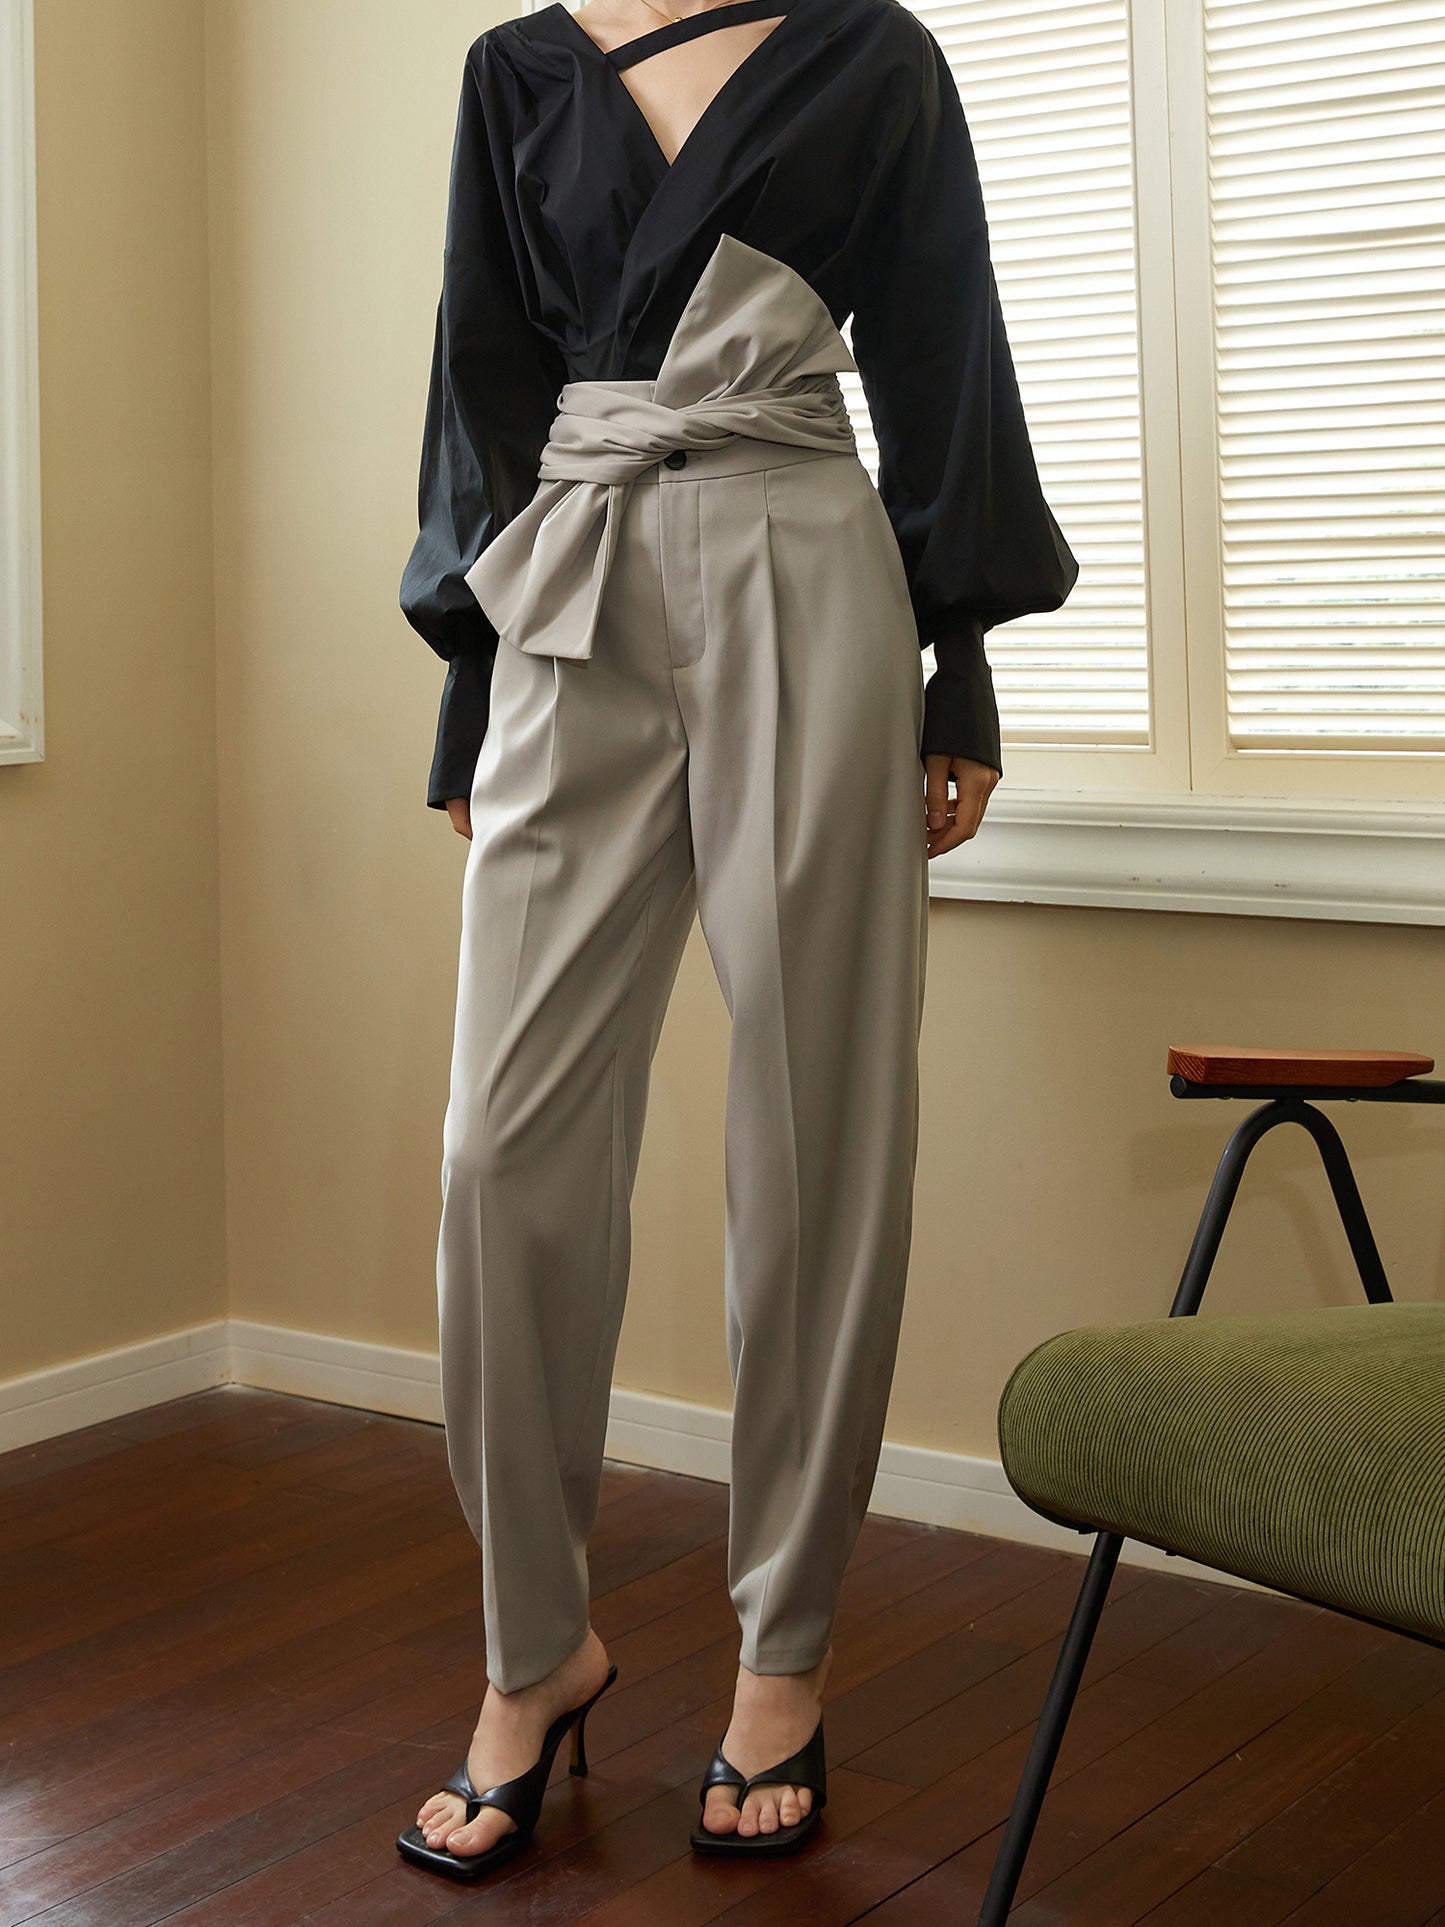 New early spring high waist trousers, designed with an asymmetric belt- Luna